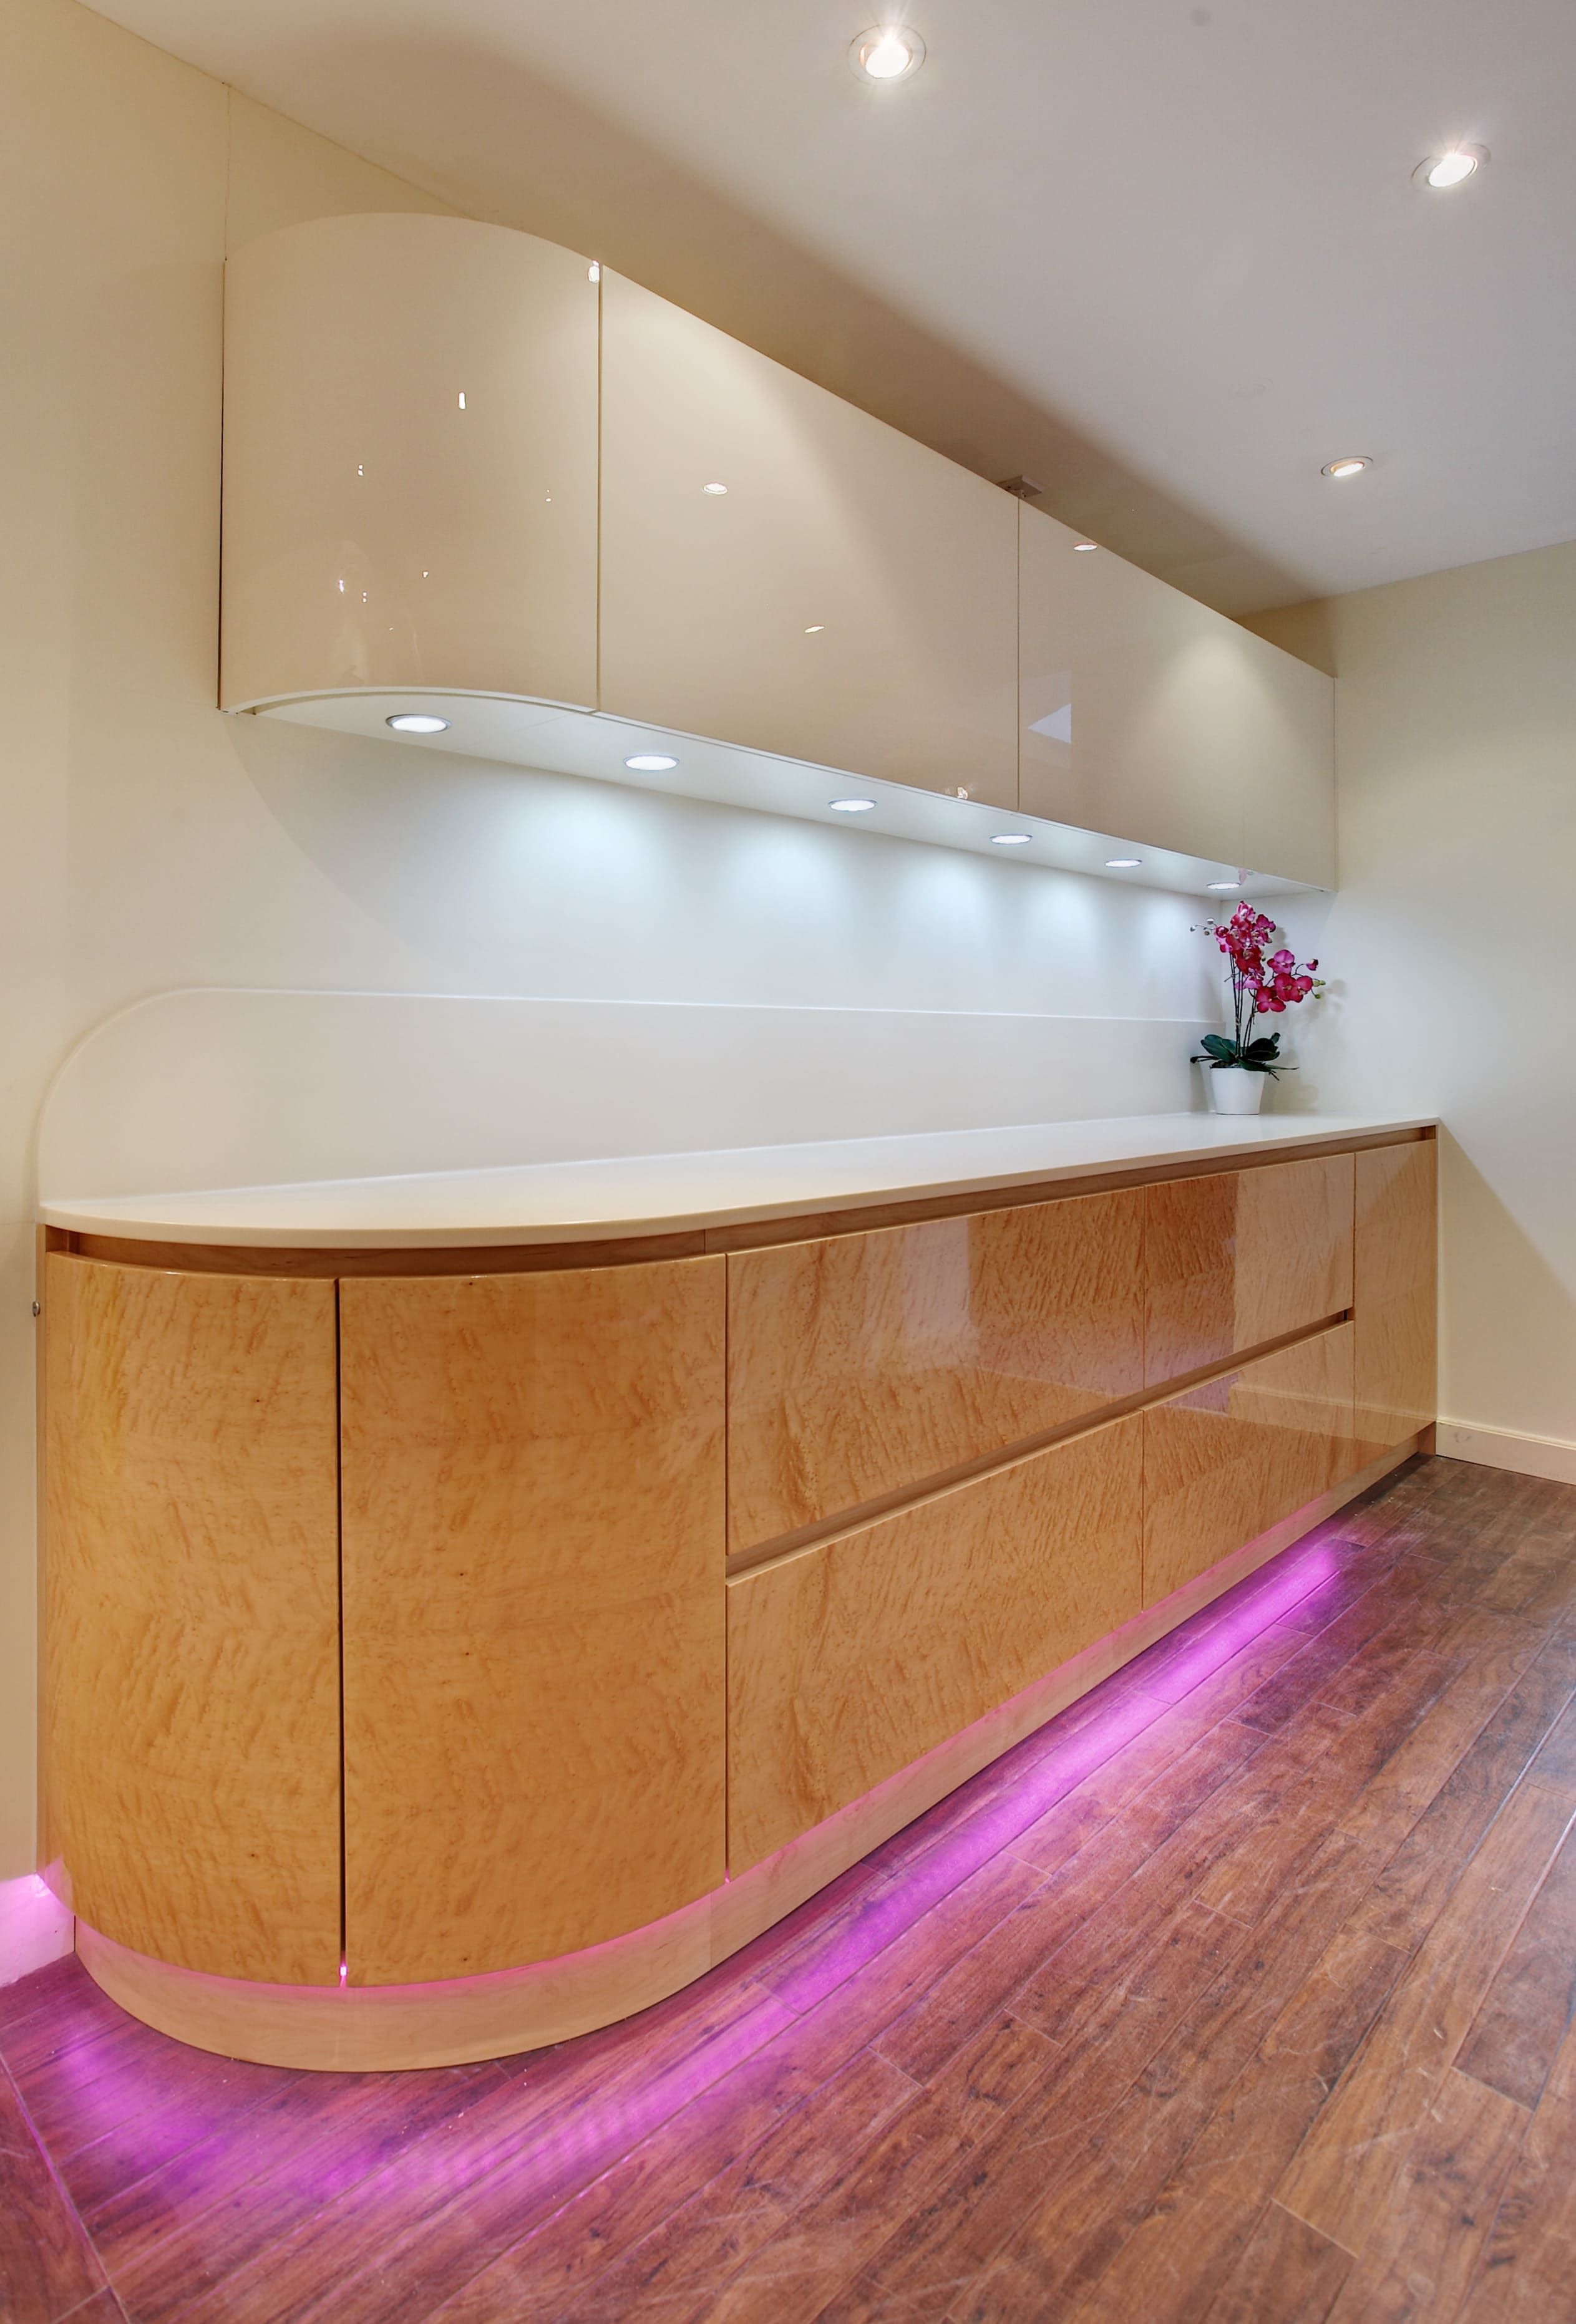 A bespoke contemporary, varnished wood corner countertop, featuring some under-counter lighting.